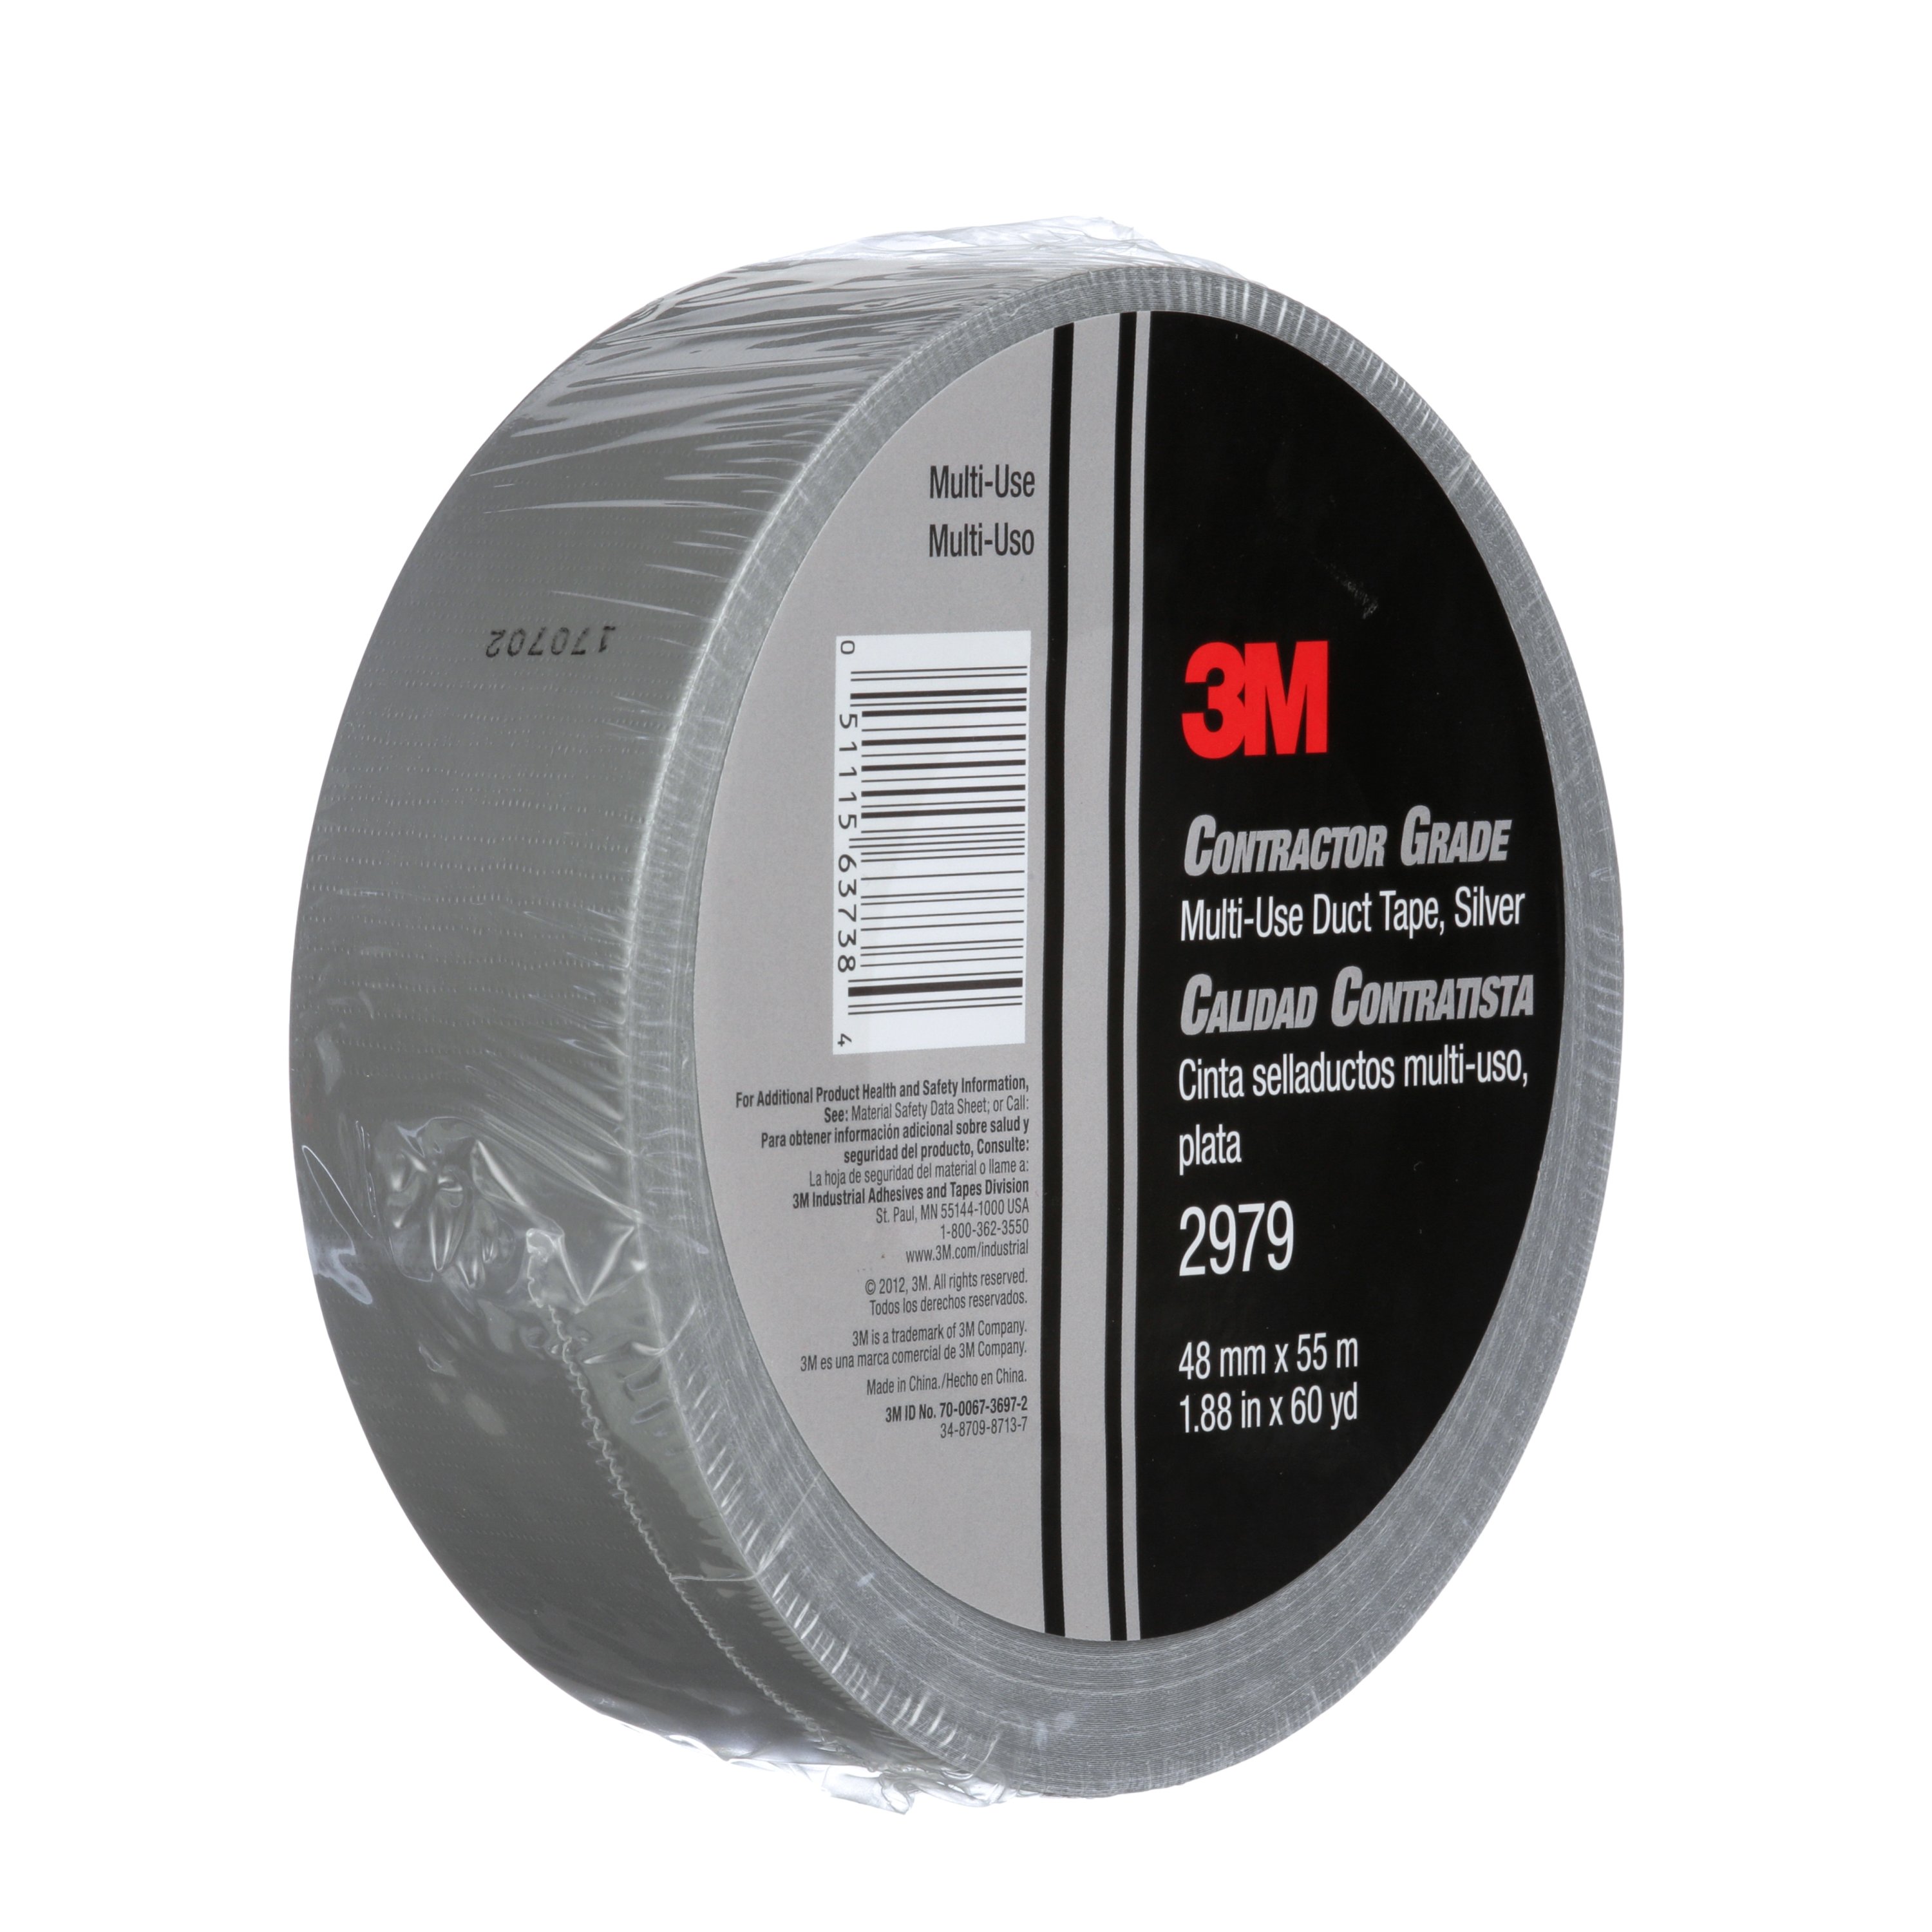 3M™ Contractor Grade Multi-Use Duct Tape 2979, Silver, 1.88 in x 60 yd,
24 per case, Individually Wrapped Conveniently Packaged